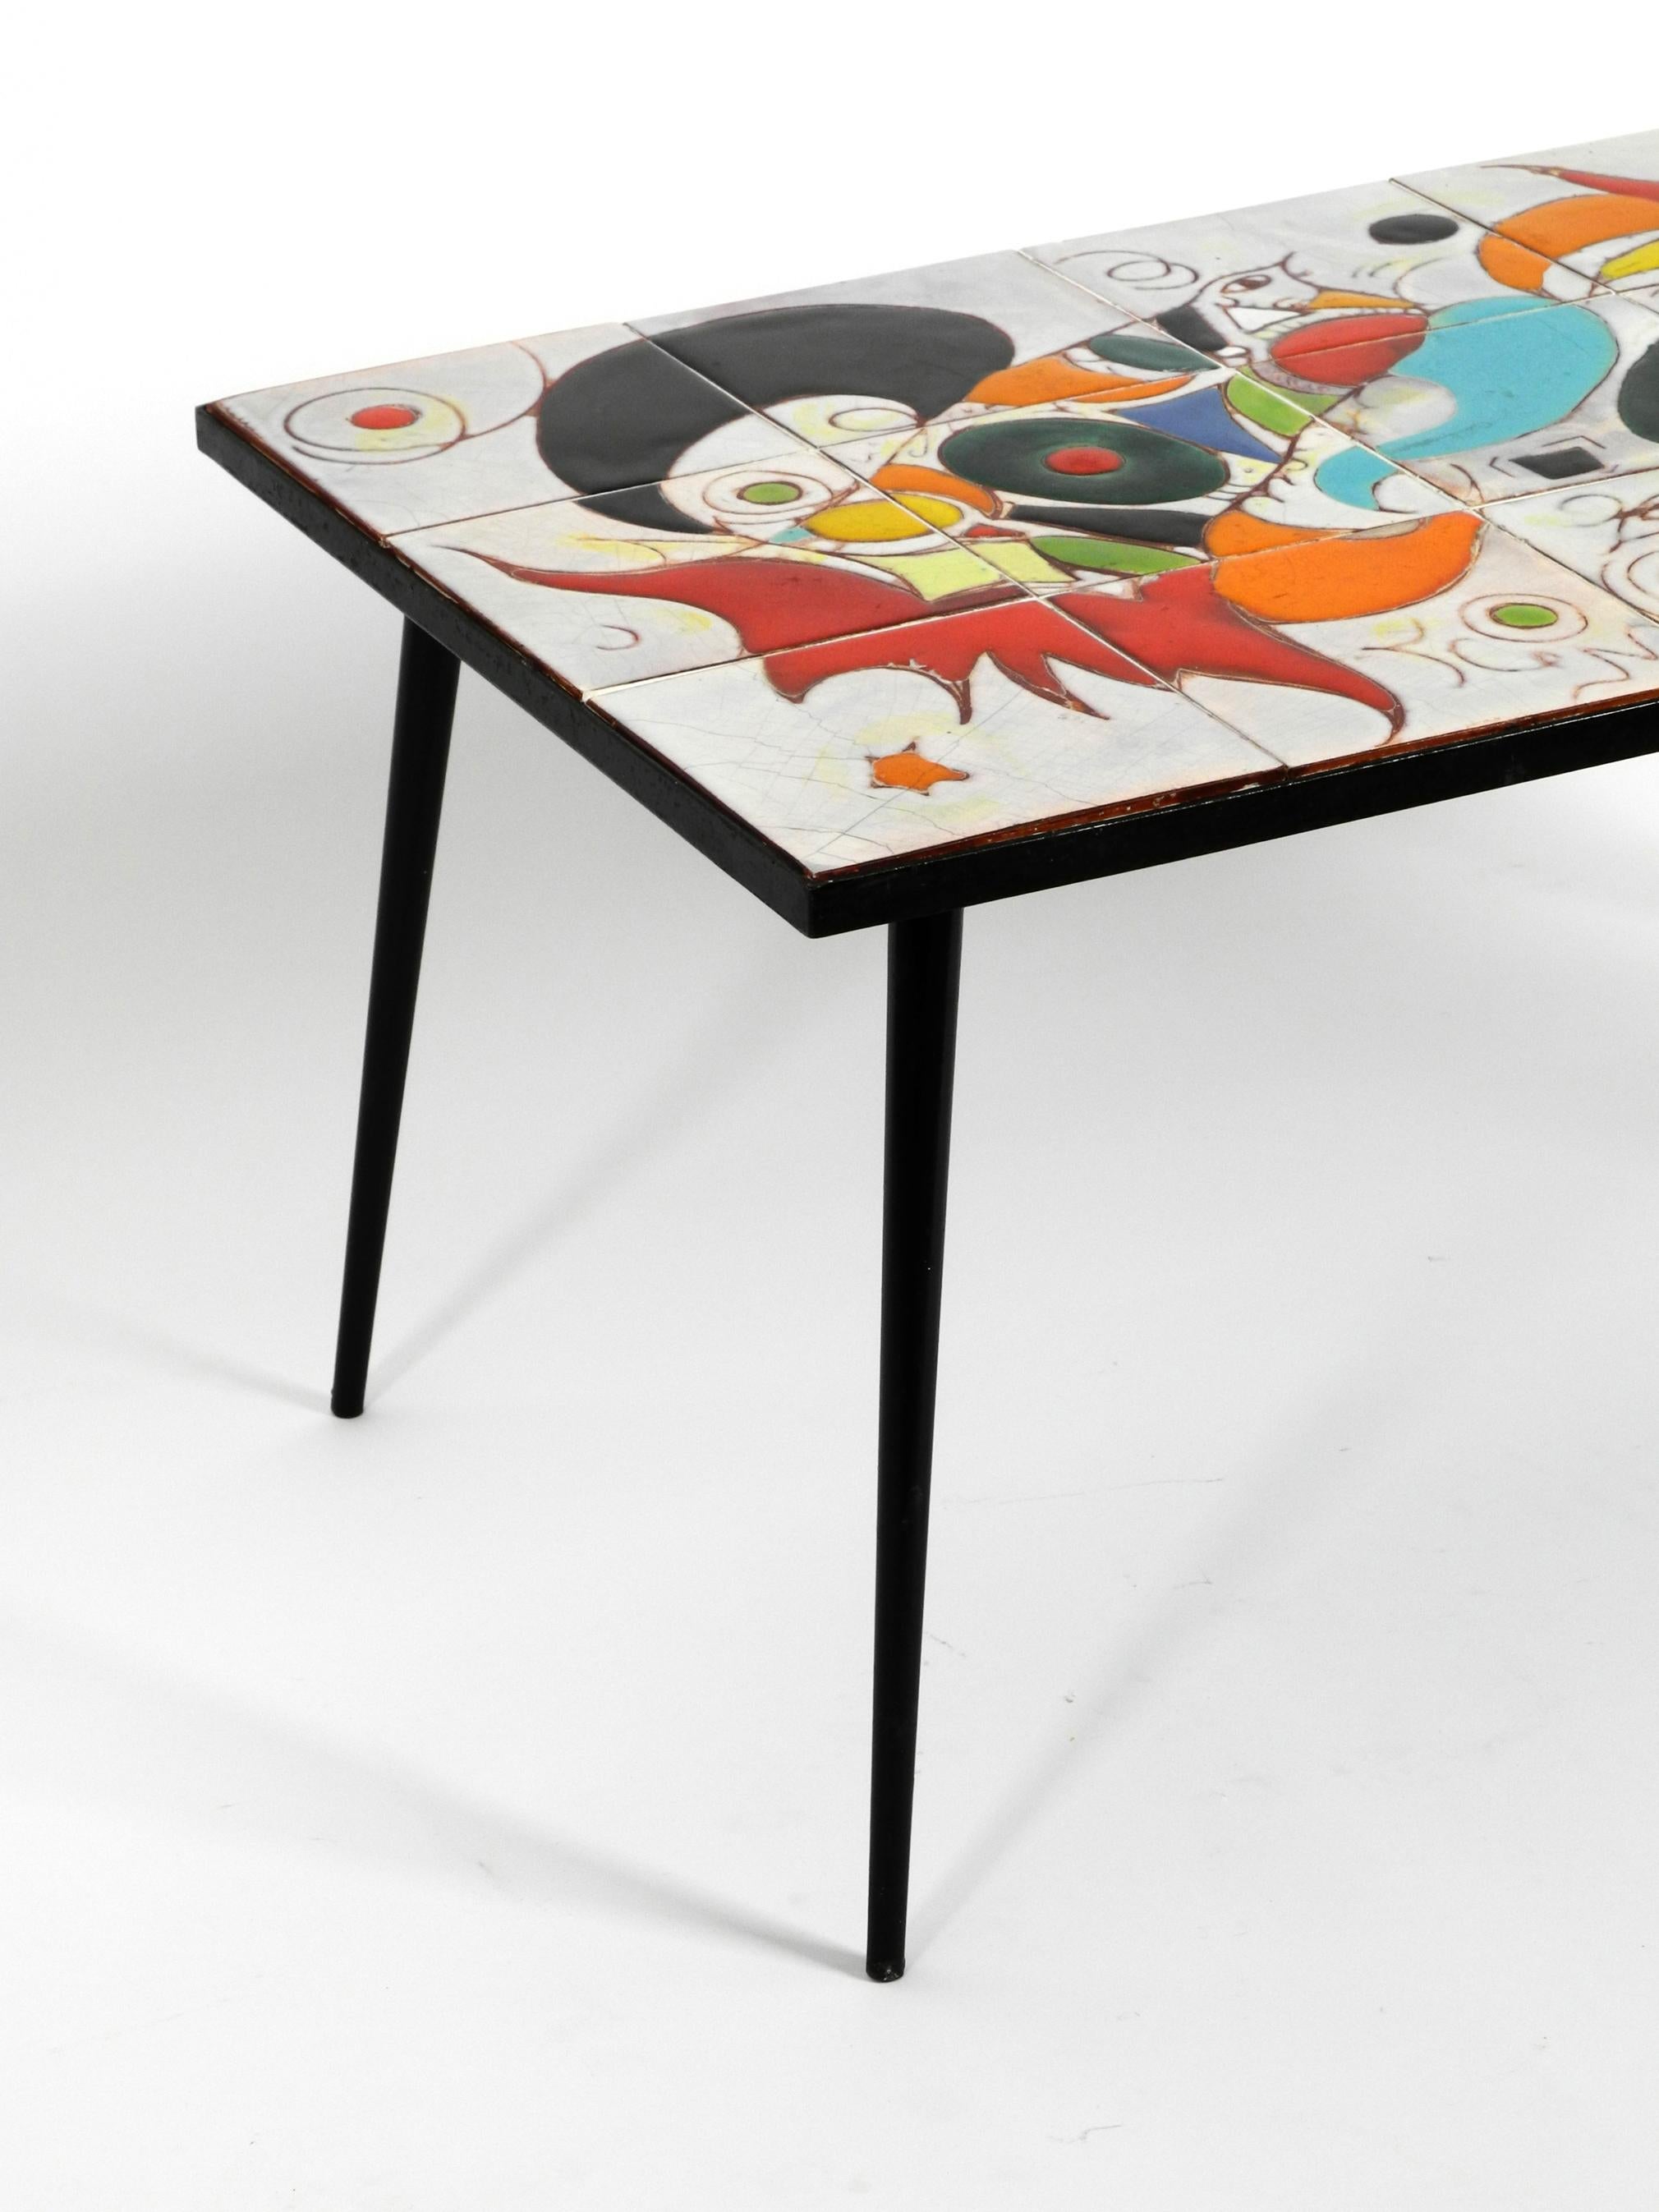 Midcentury Italian Modern Iron Table with Tiled Top and Abstract Motif For Sale 7